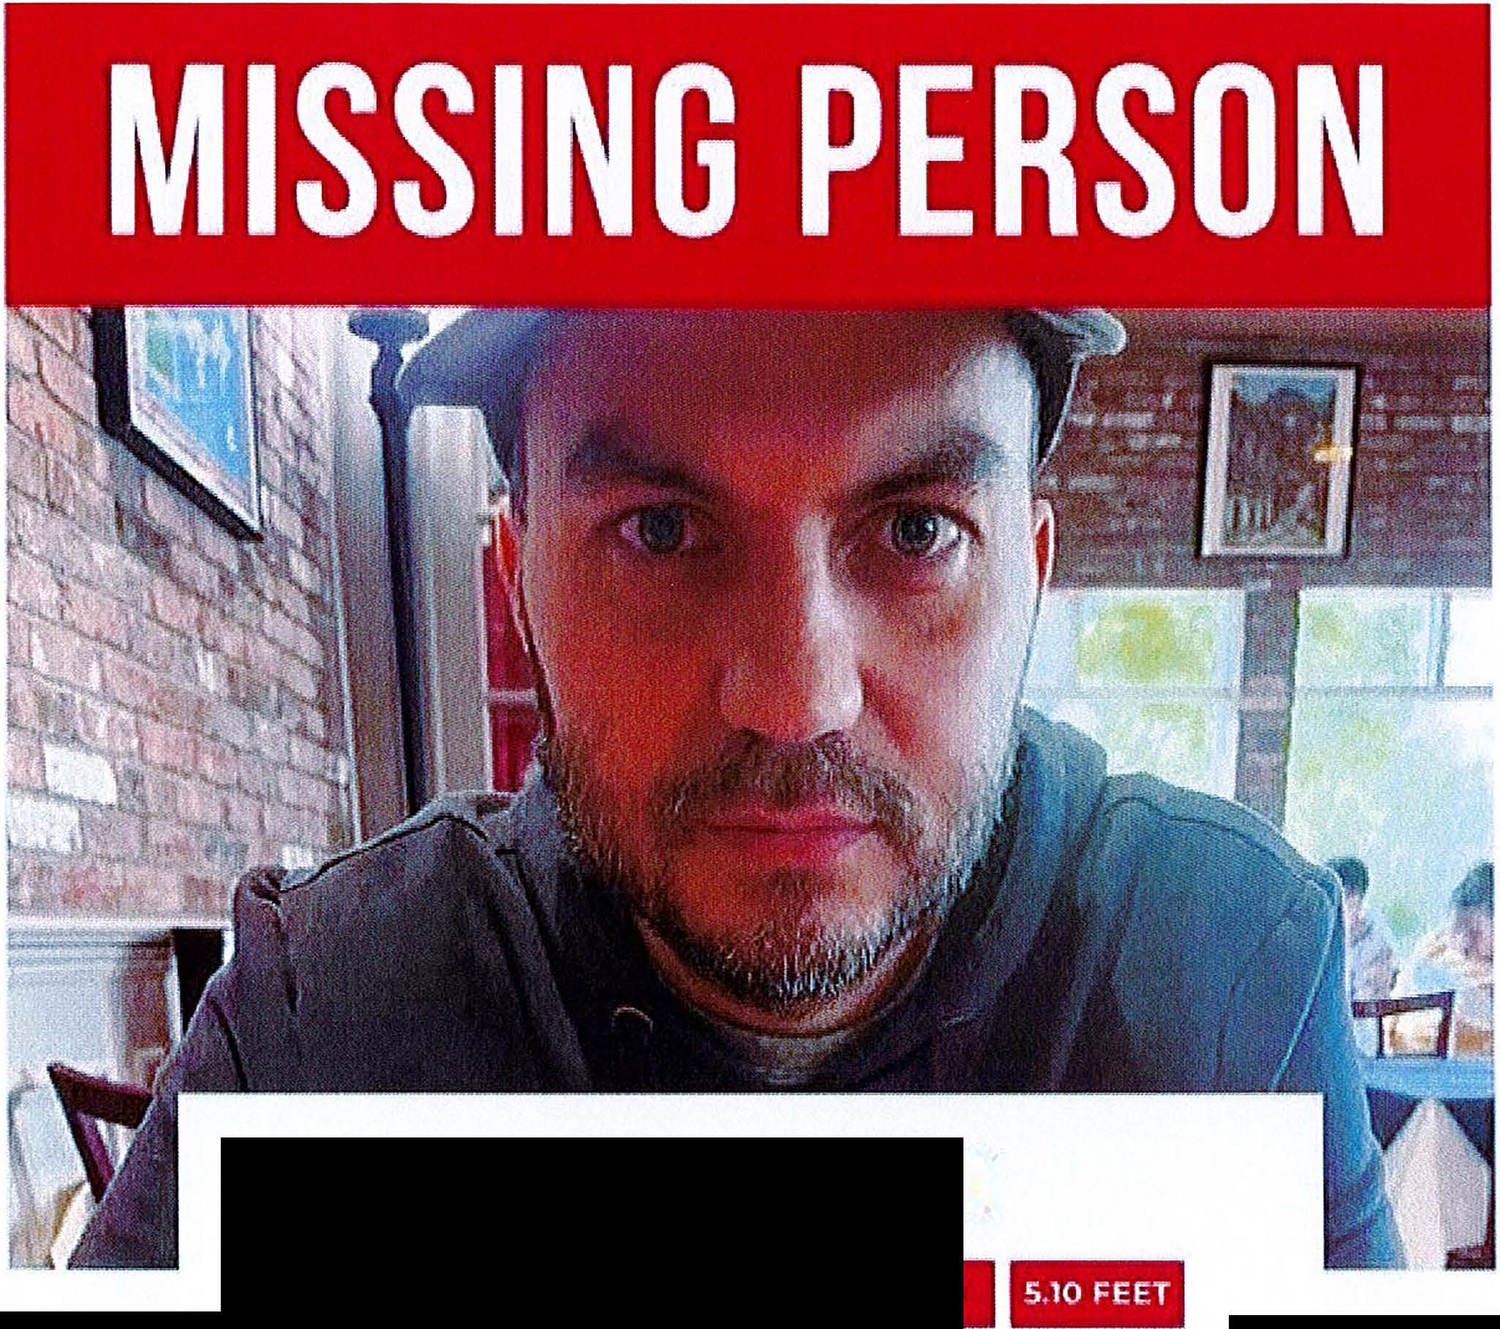 Police are searching for a missing East Hampton man, Lucas T. Desario.